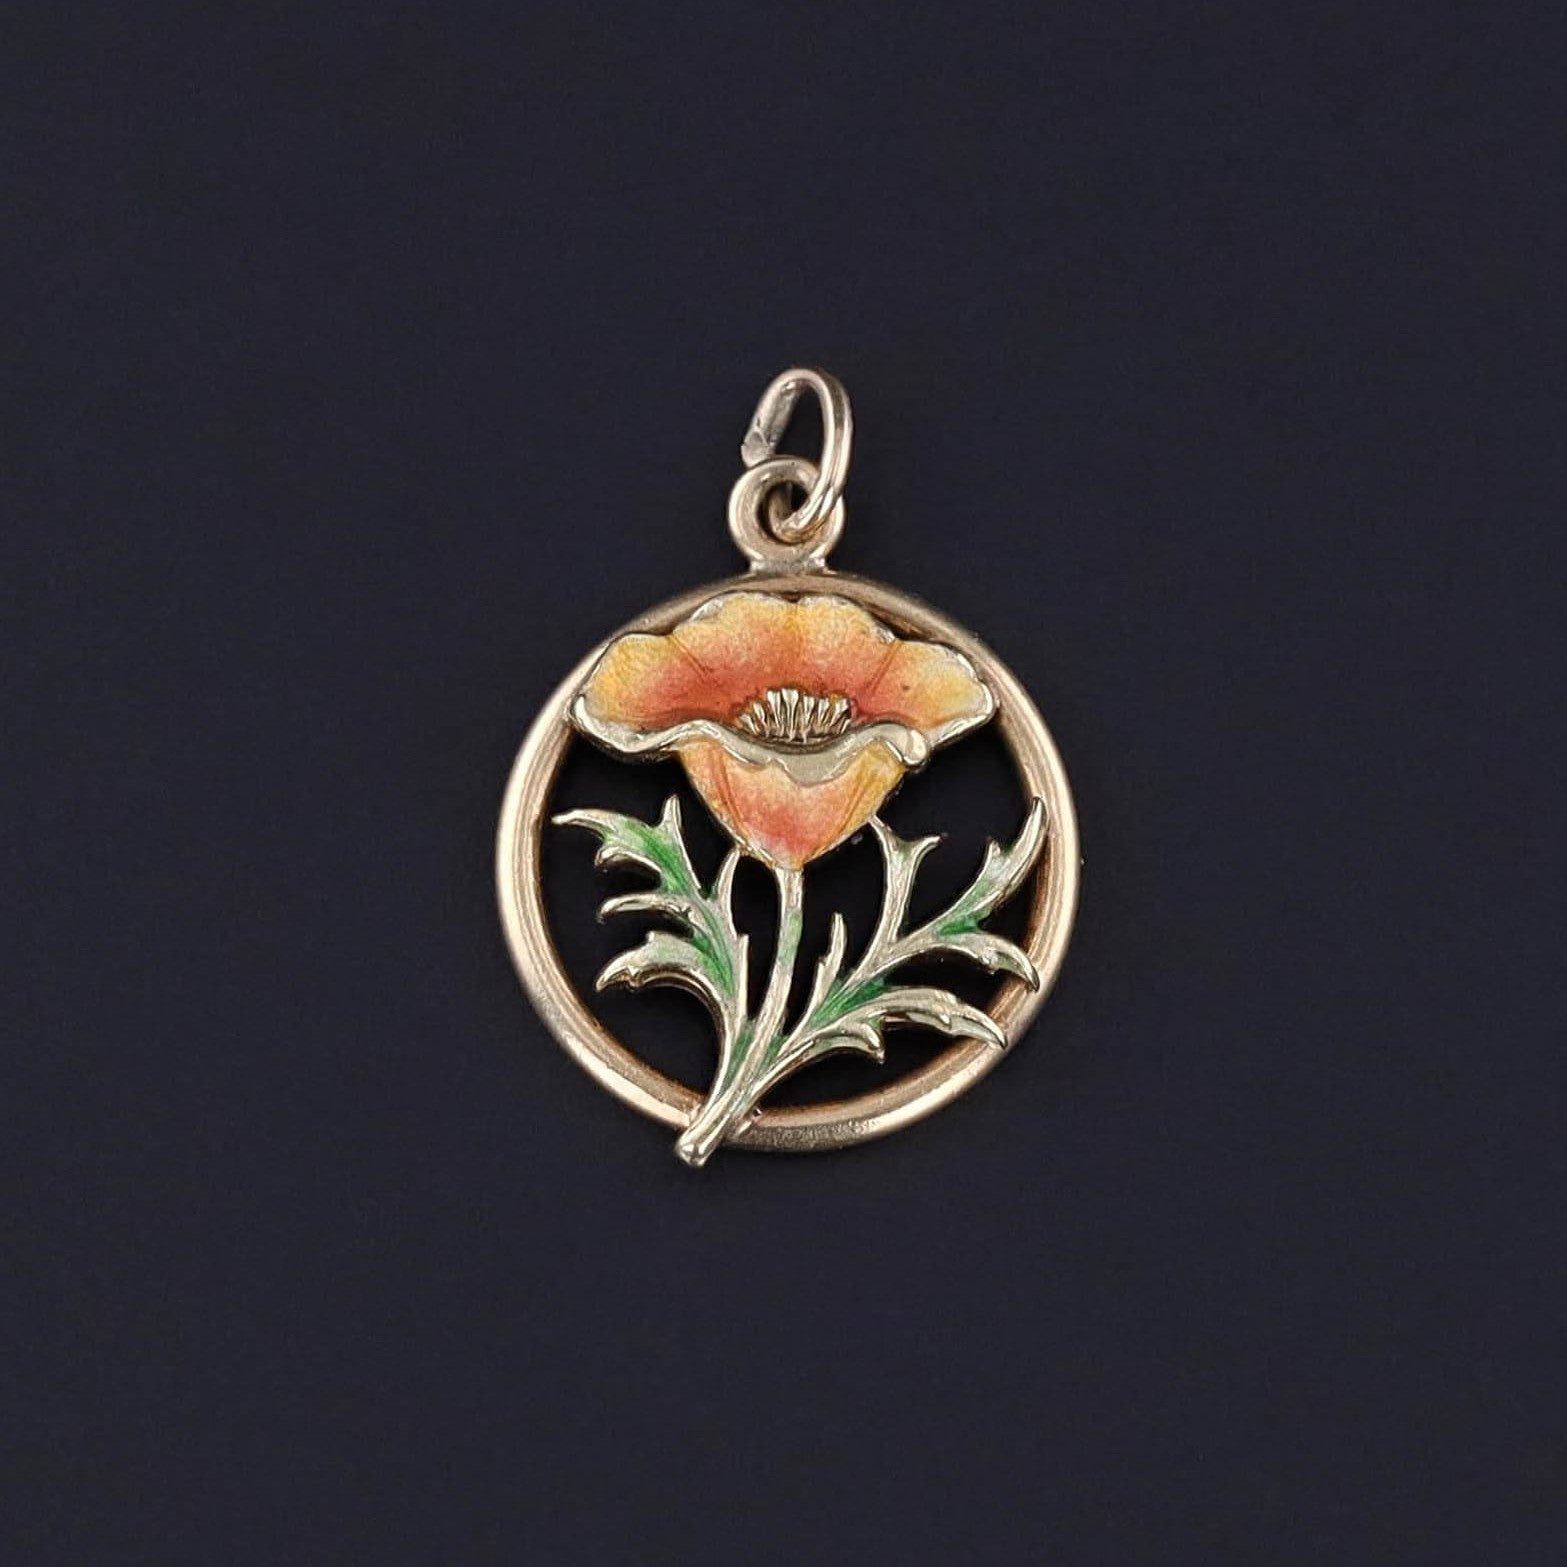 An antique enamel poppy flower charm of 14k gold. The piece would be perfect worn on a gold chain, charm bracelet, or charm necklace. It would also be a great gift for anyone who lives poppies or anyone named Poppy.